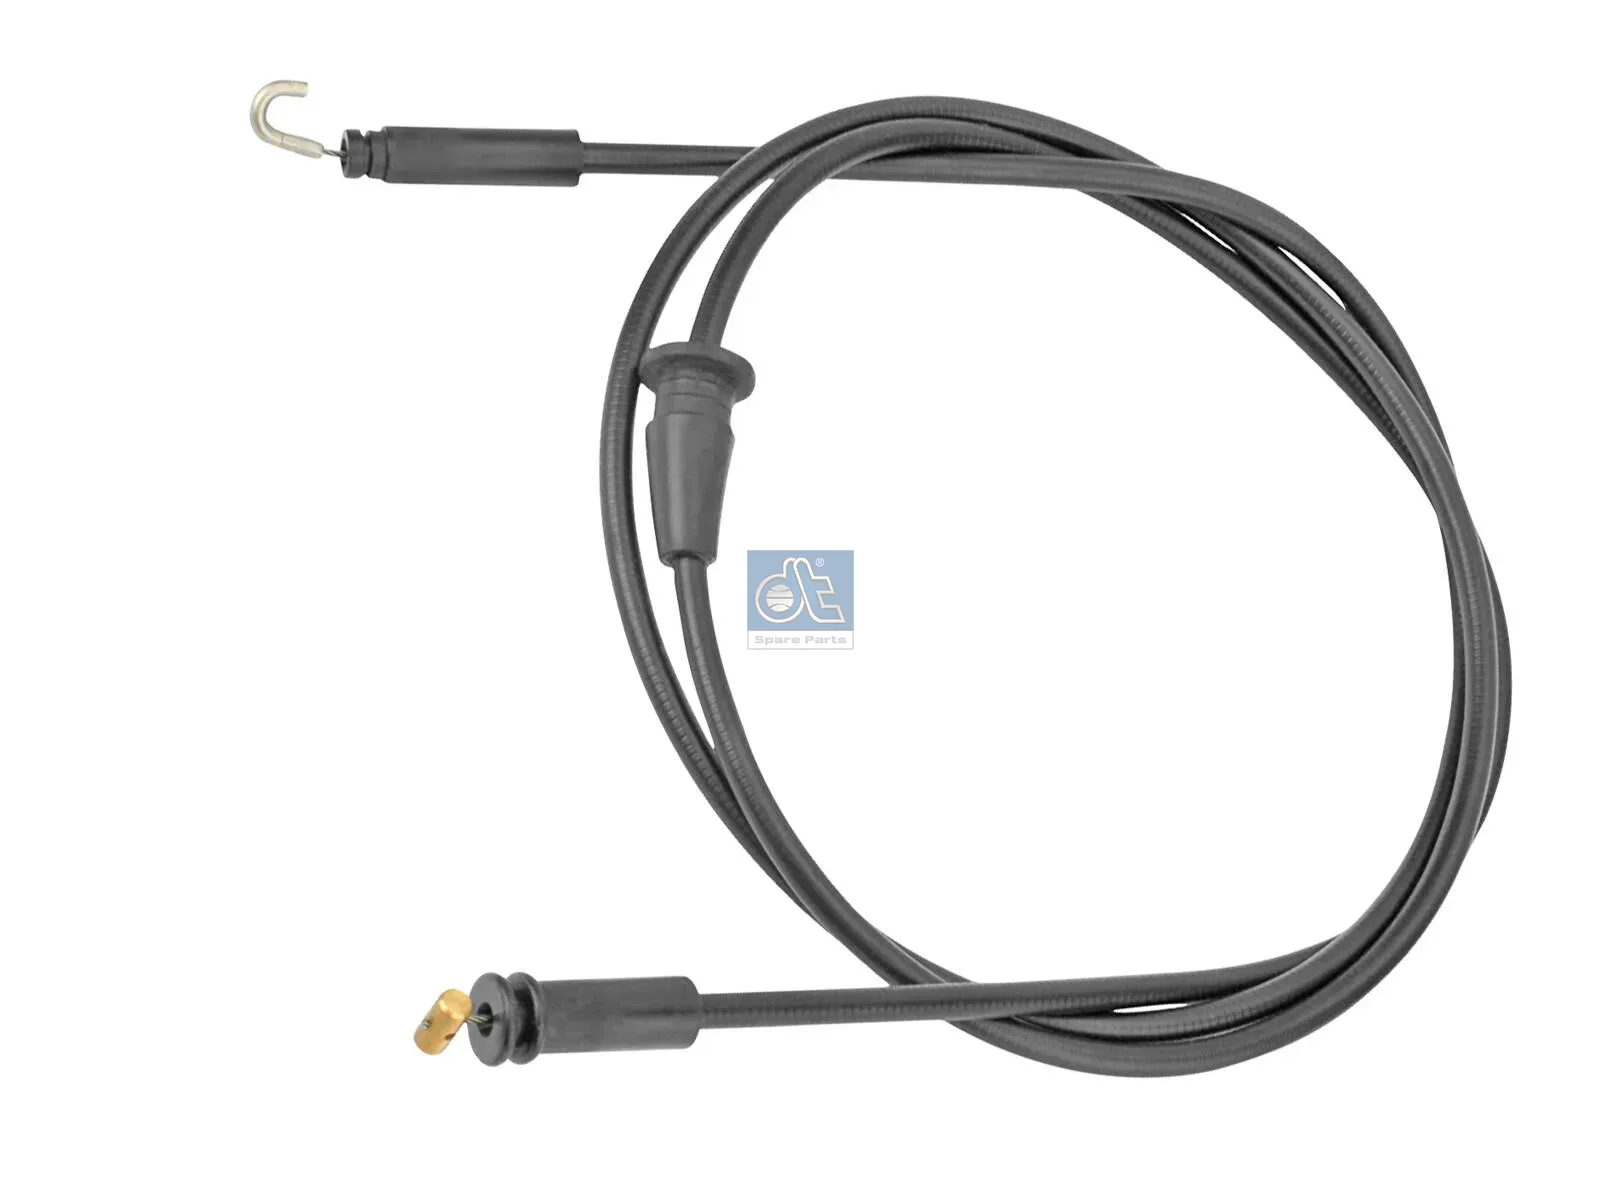 Cable bowden, trampilla frontal